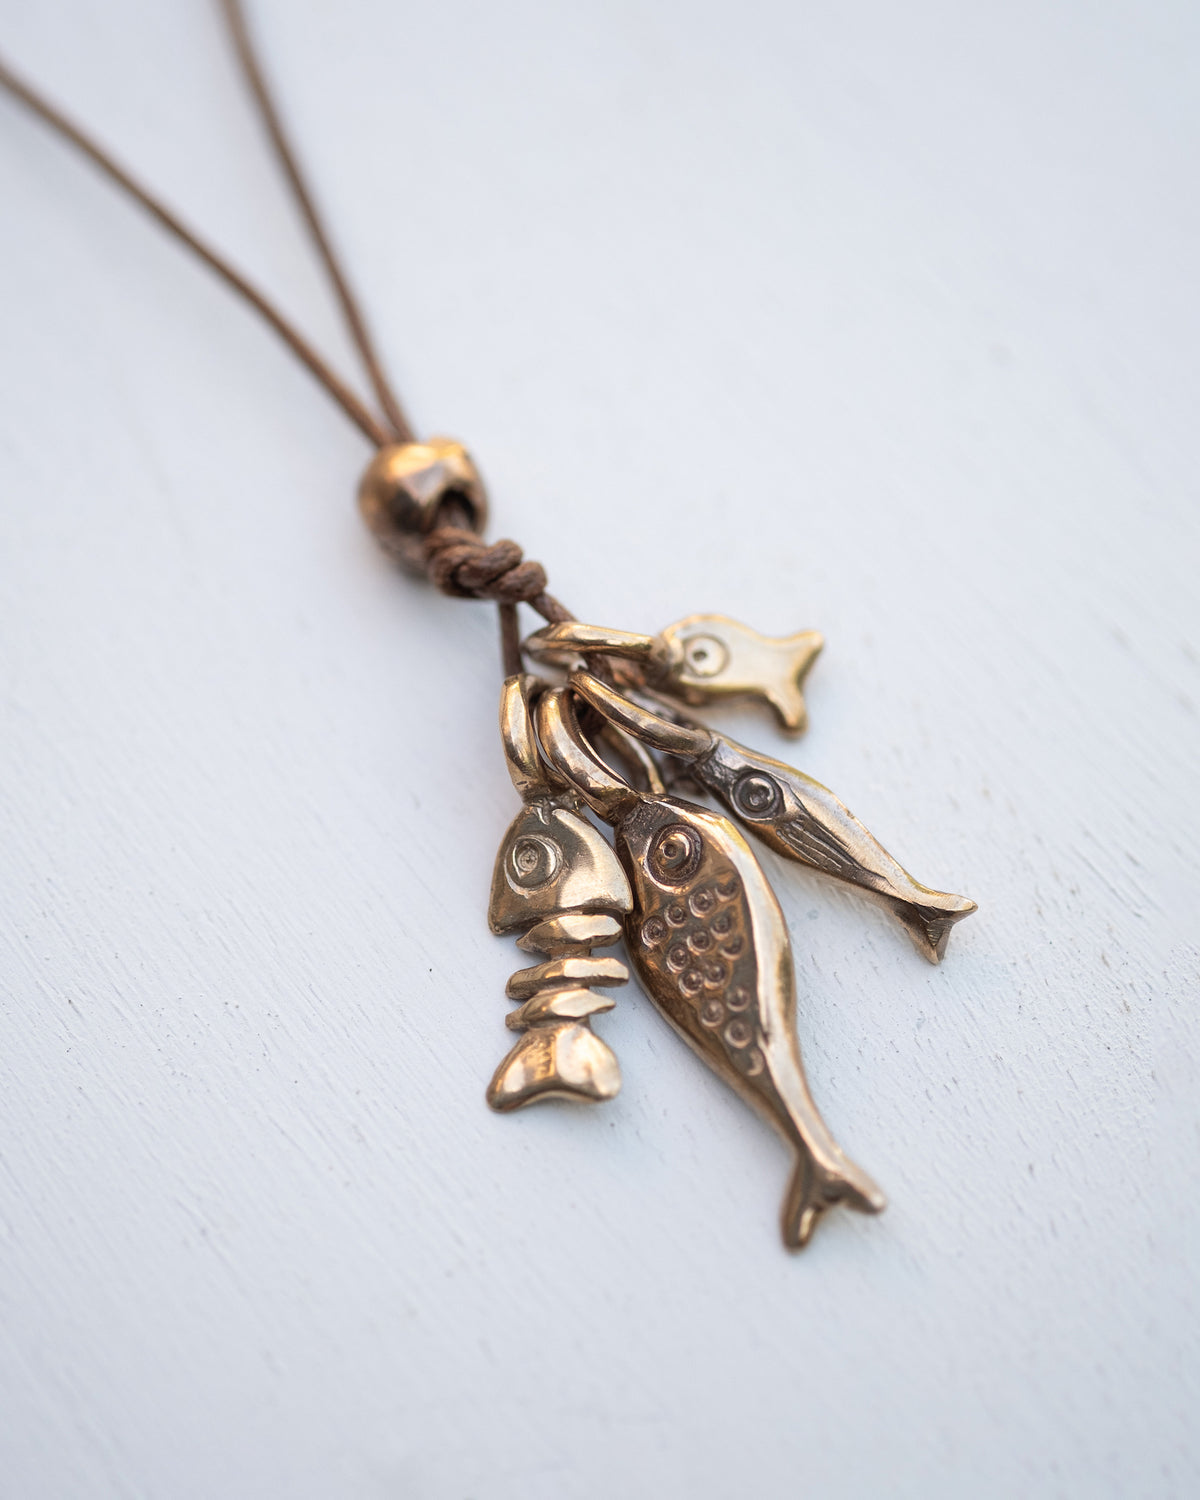 Catch of the Day Pendant